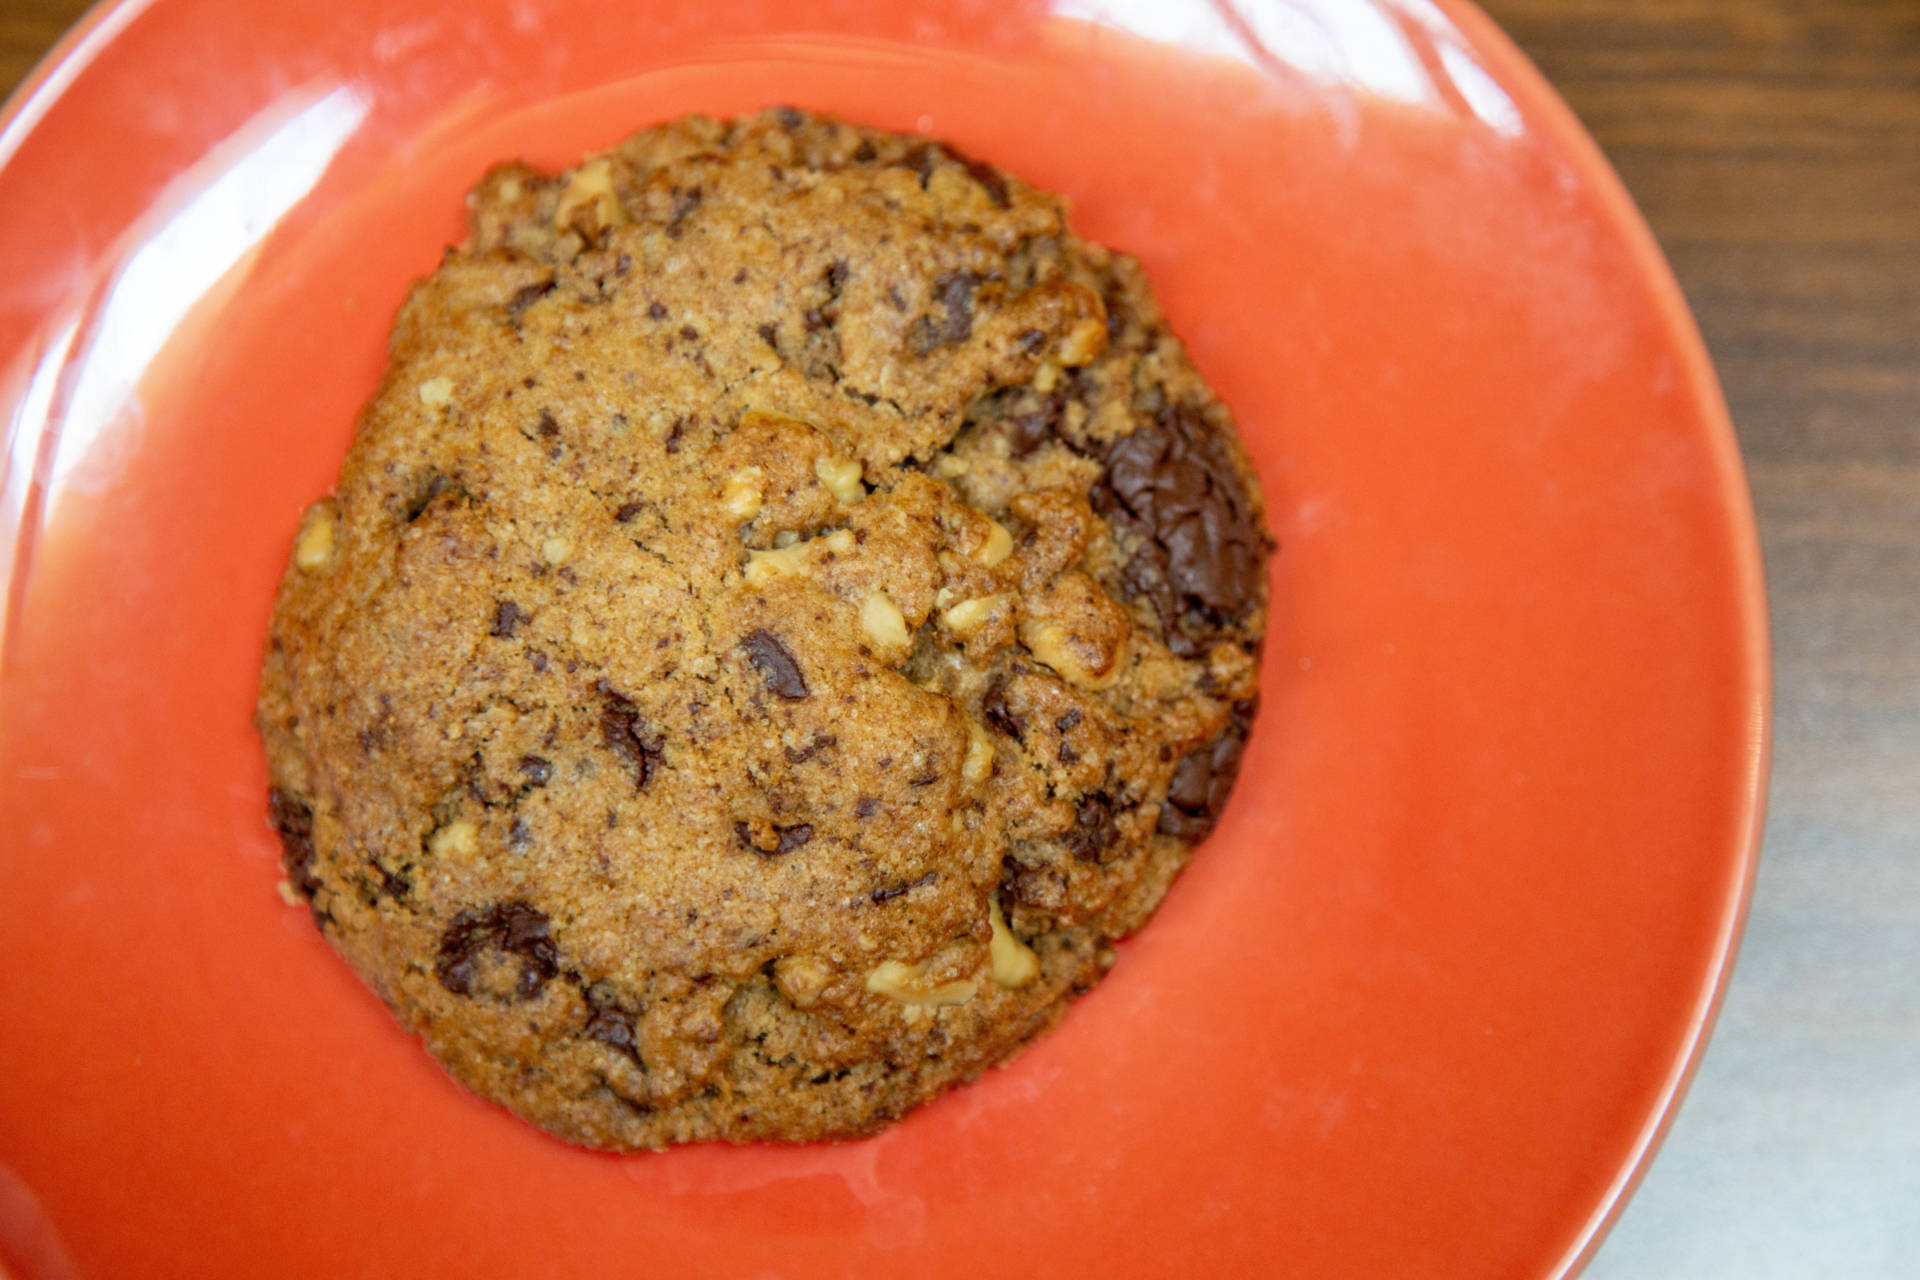 Manresa Bread's hefty chocolate chip cookie with walnuts.